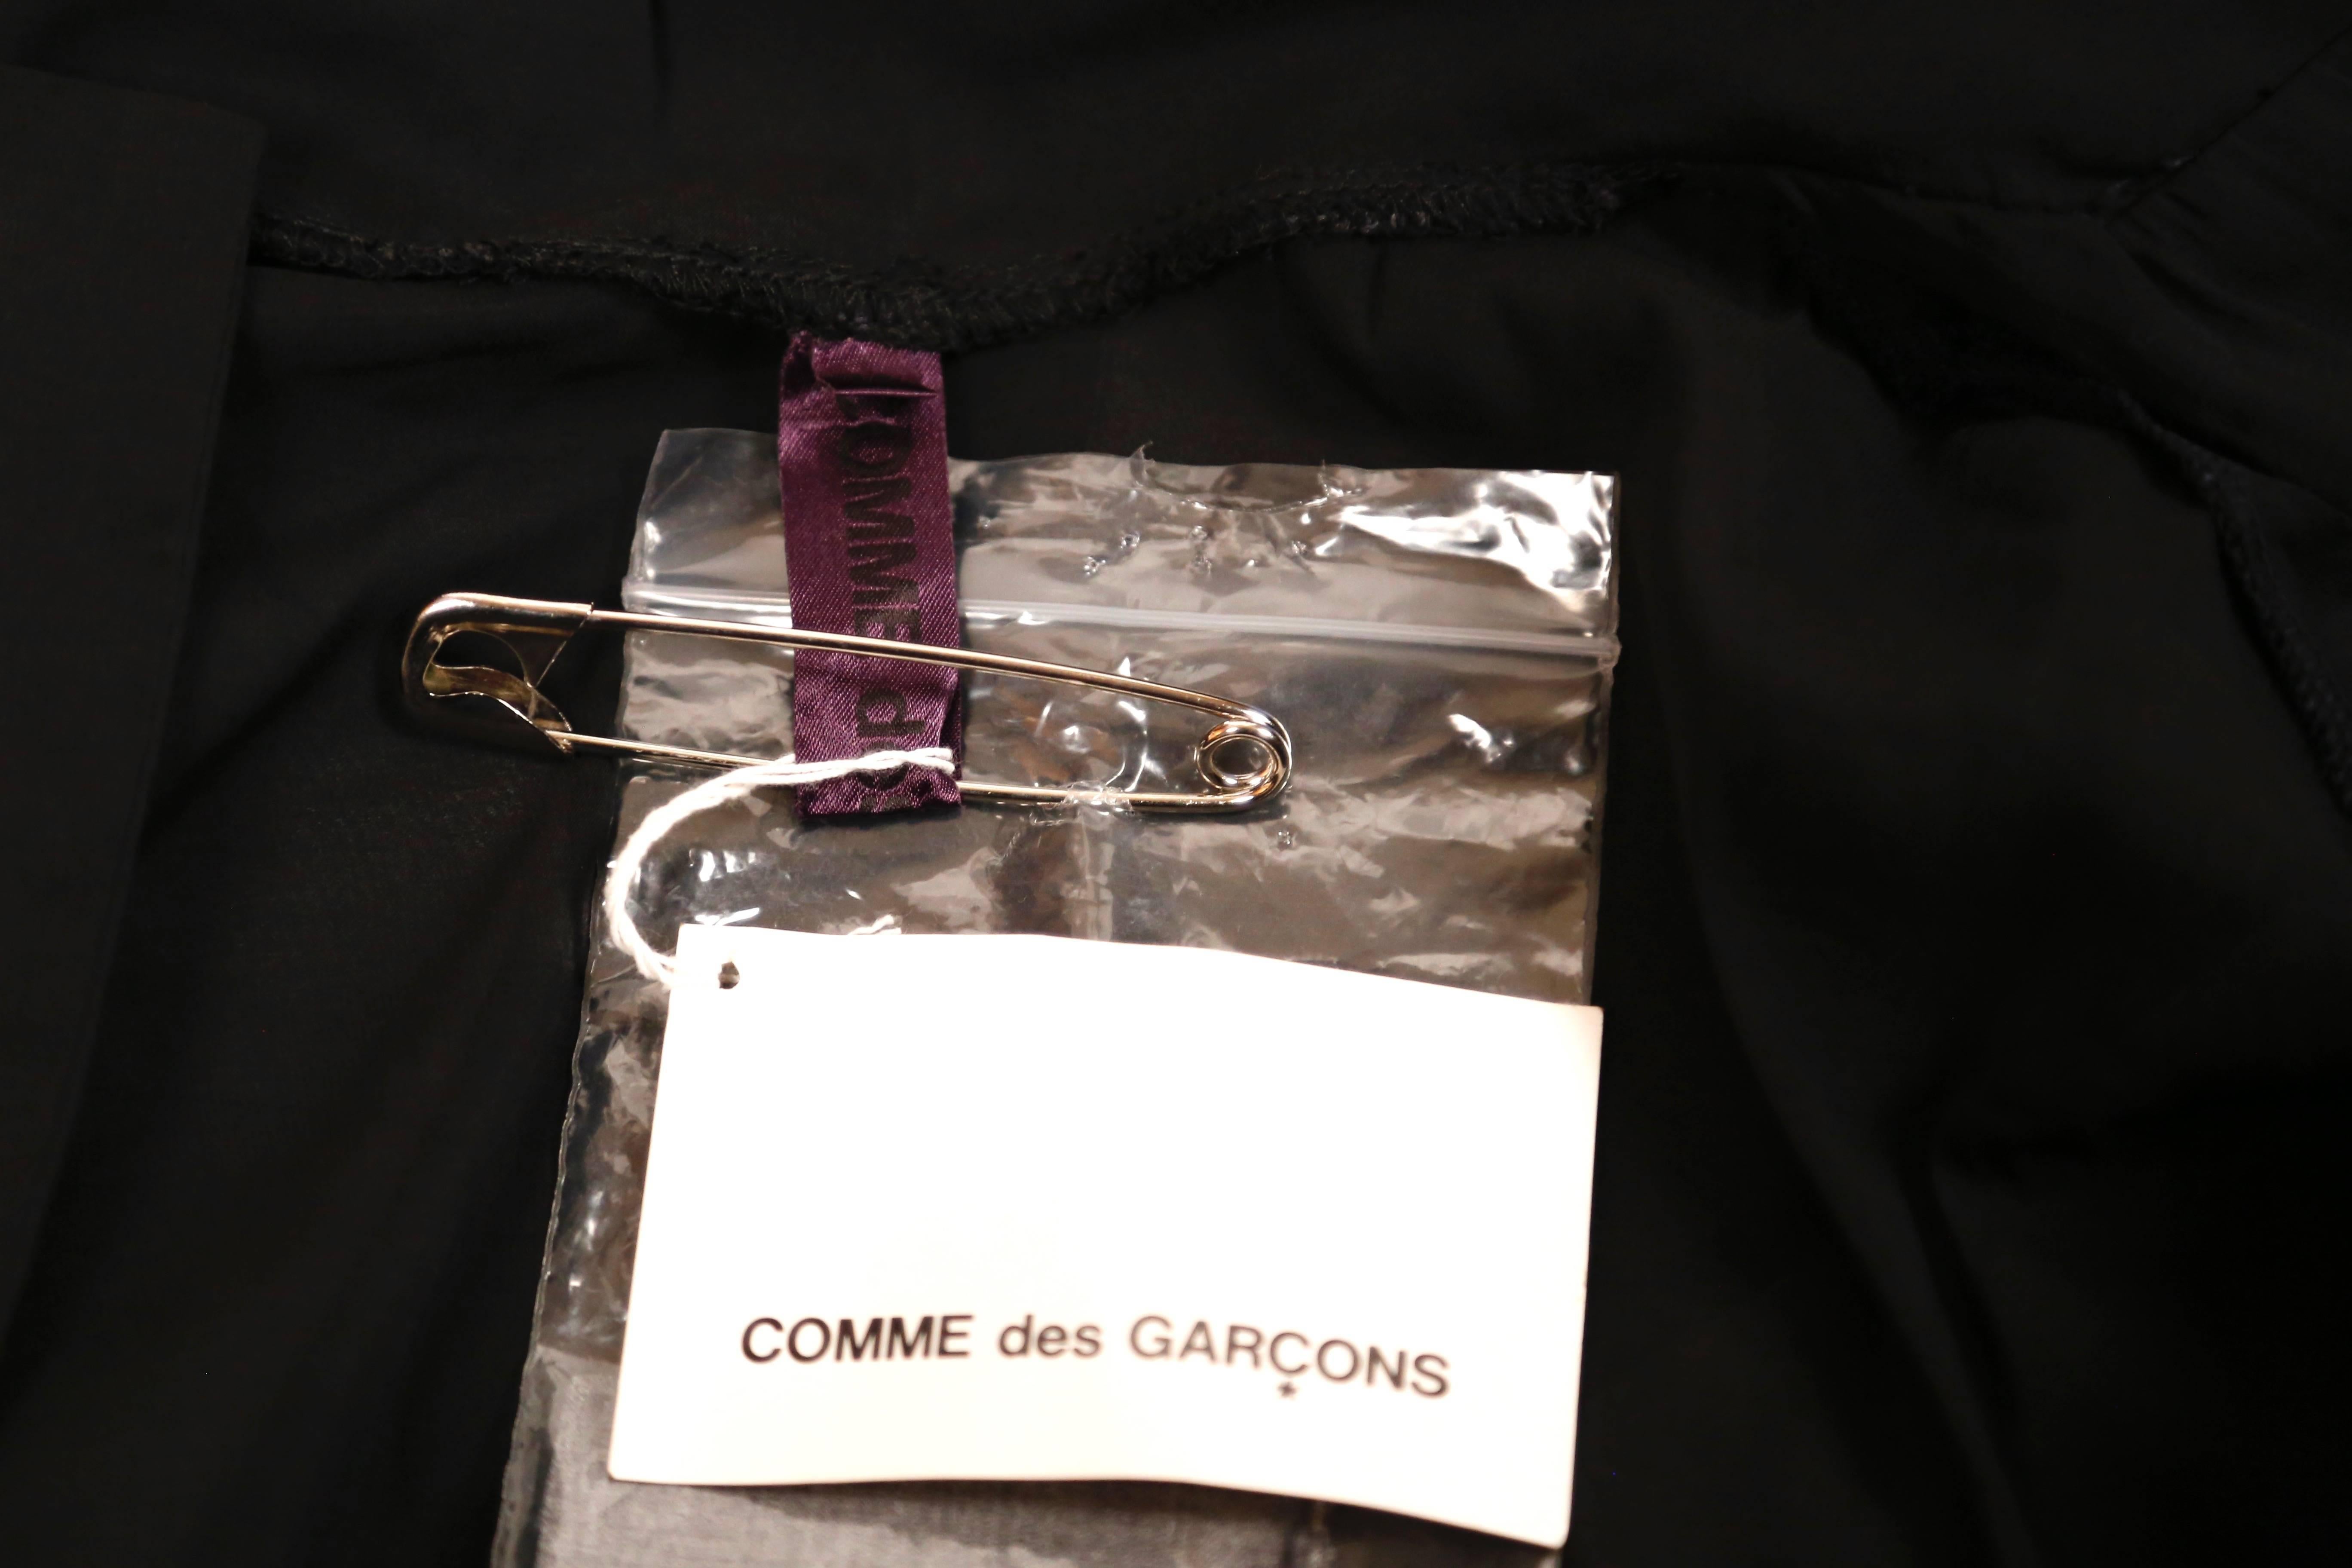 Gray new 2000 COMME DES GARCONS double layer runway dress with safety pin closure